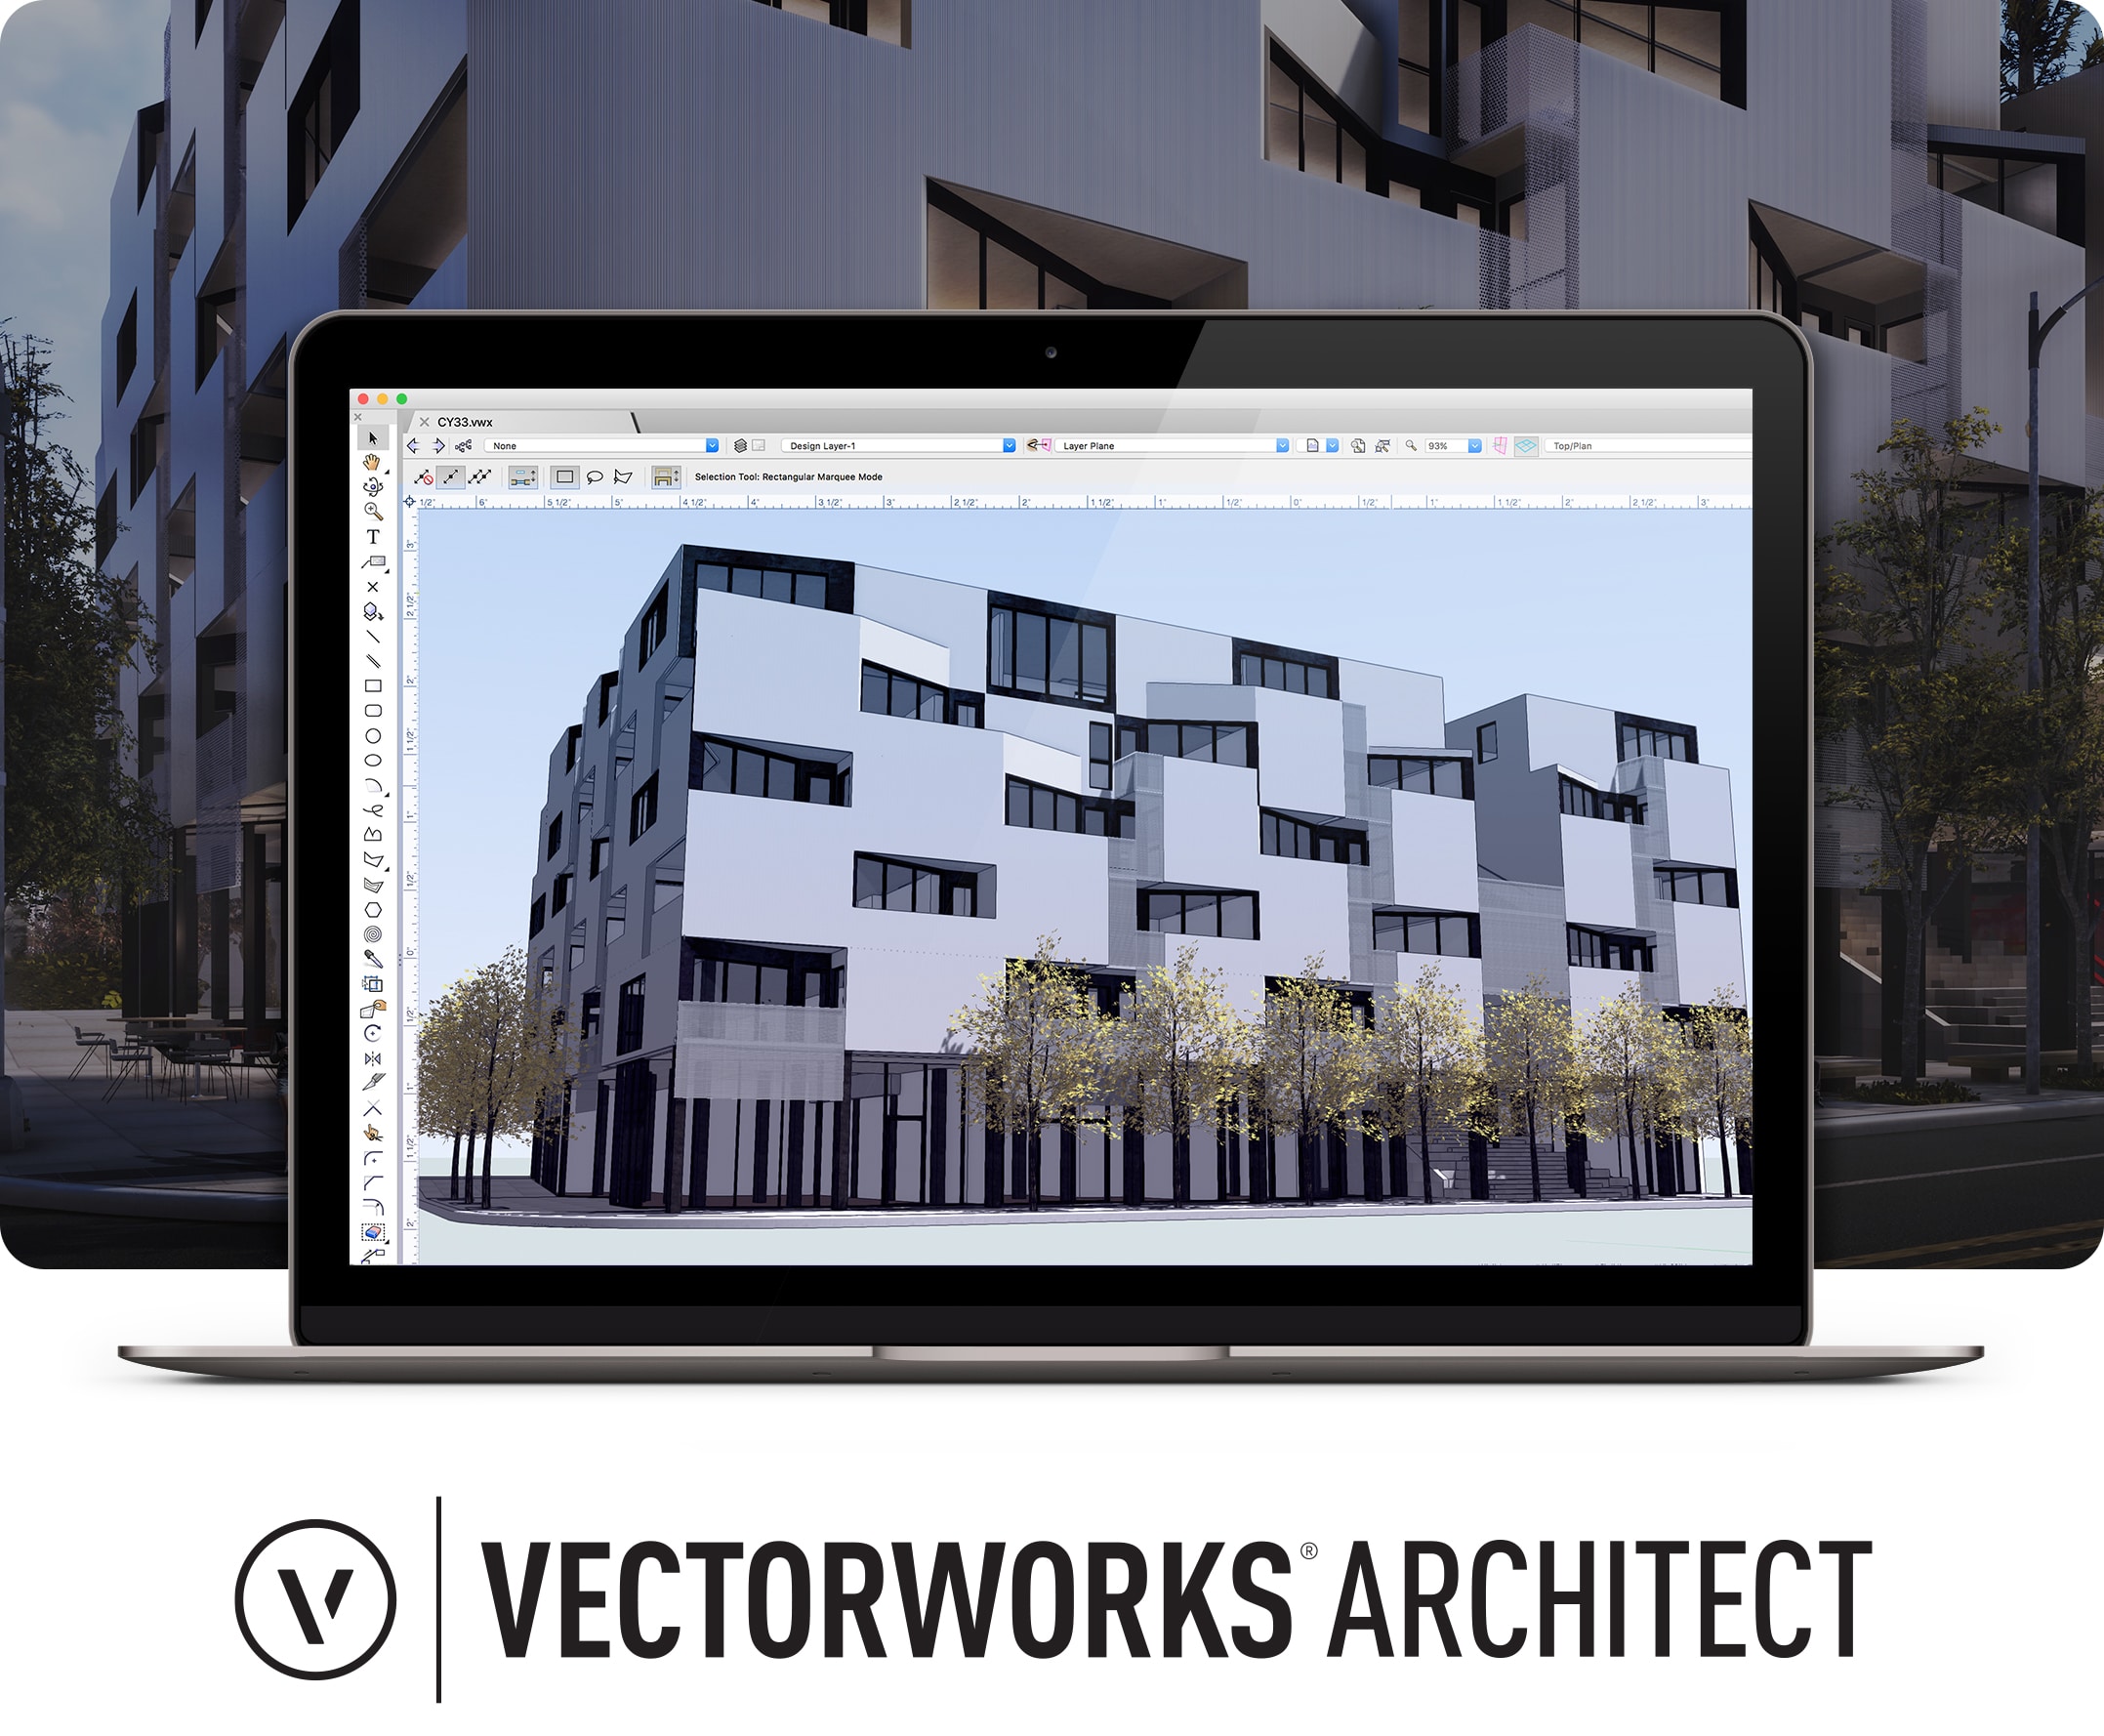 Vectorworks Inc. Introduces new Vectorworks 2020 Product LineUp